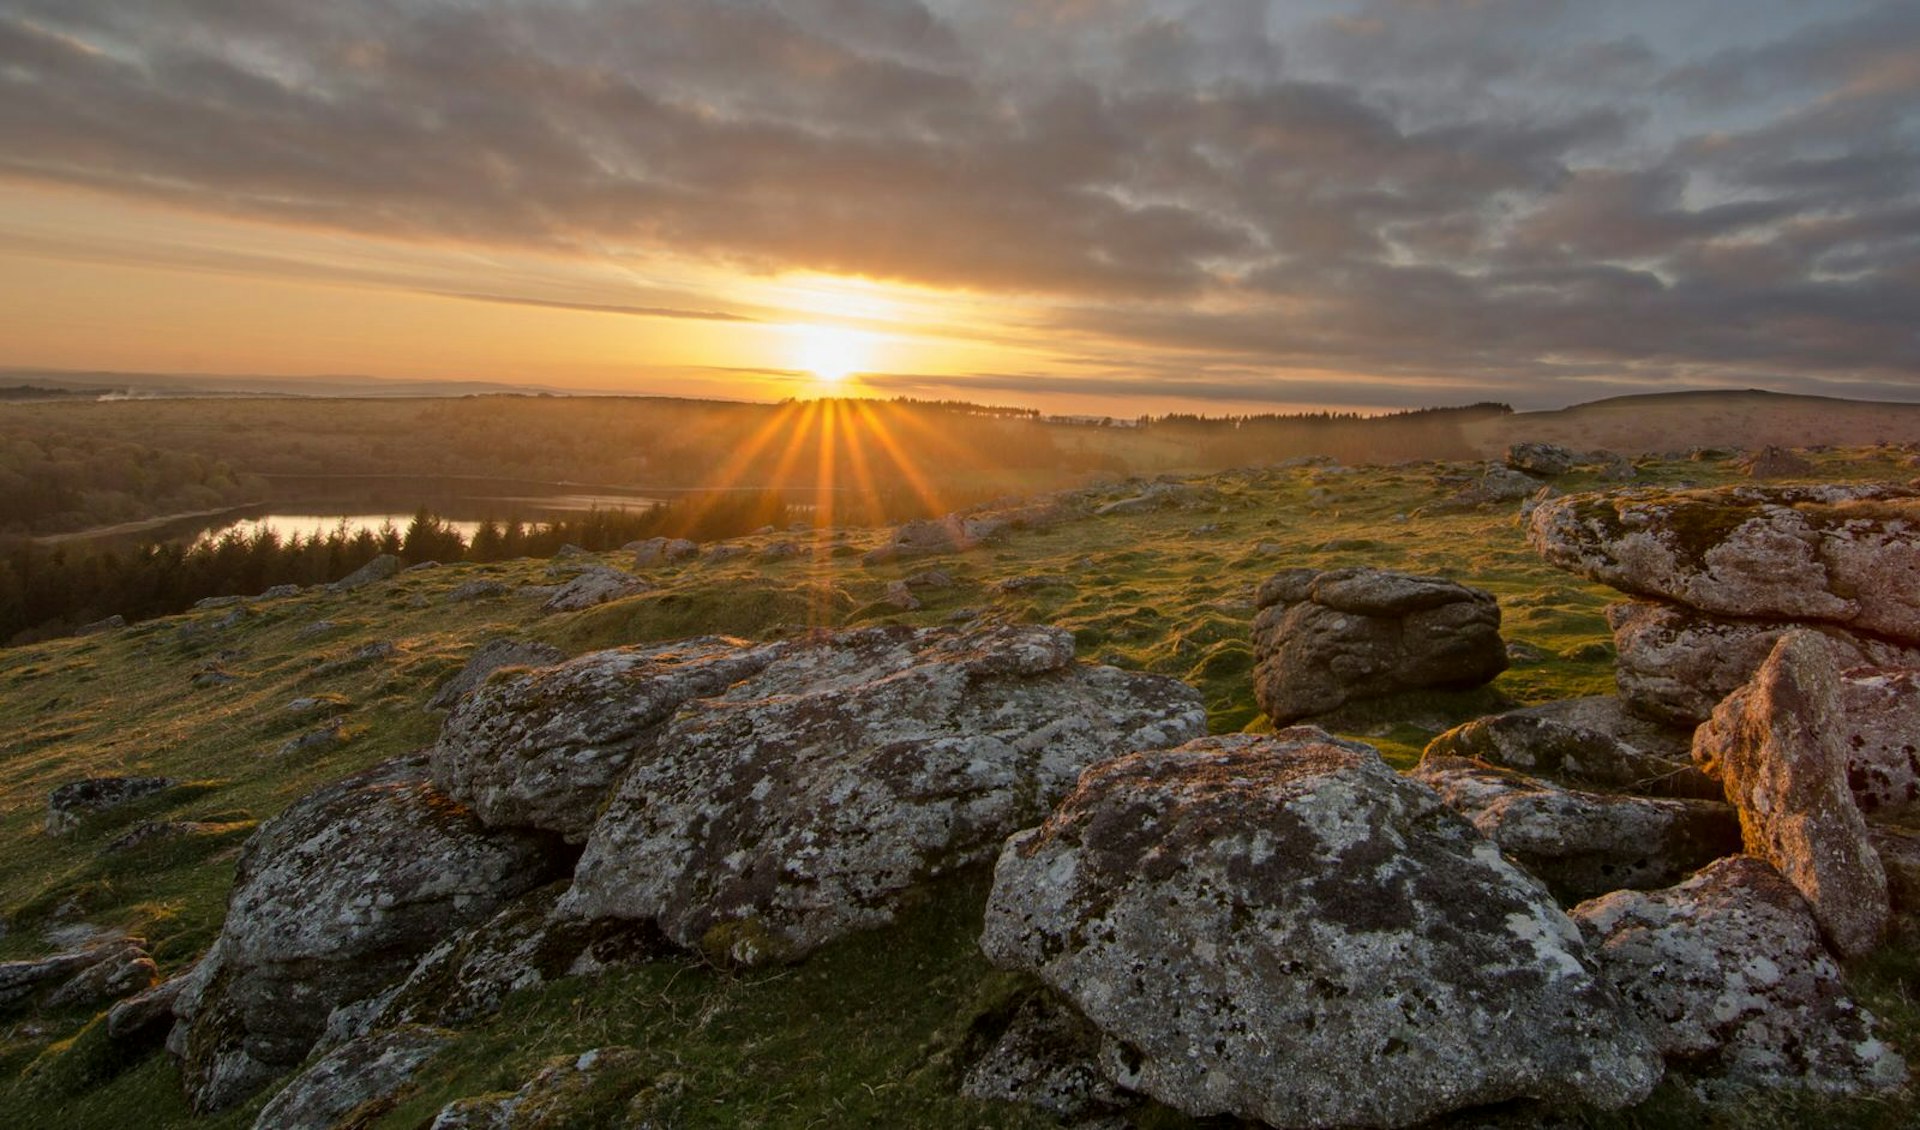 Dartmoor National Park photographed at sunset